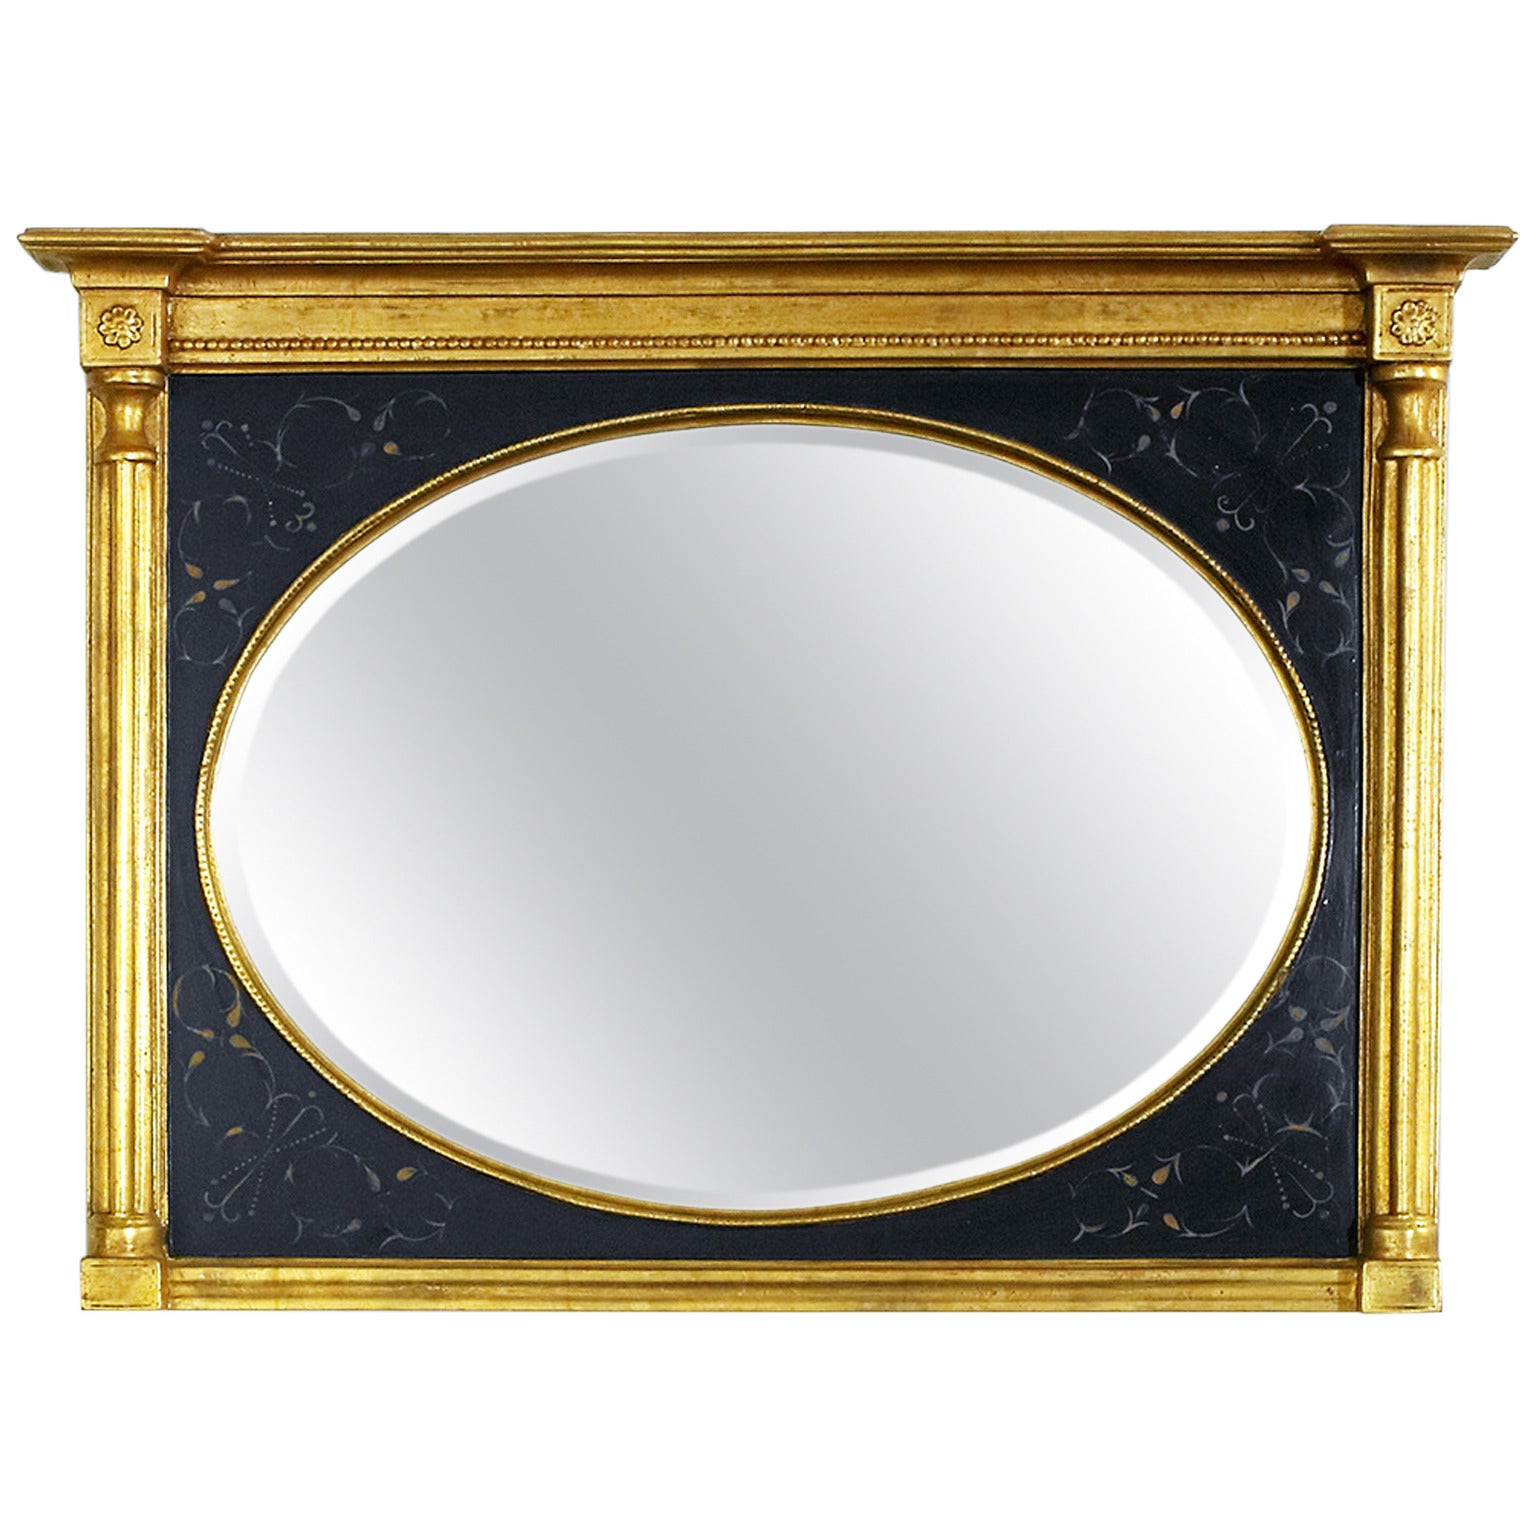 Black and Gold Mirror with Bevel Over Man's Chest